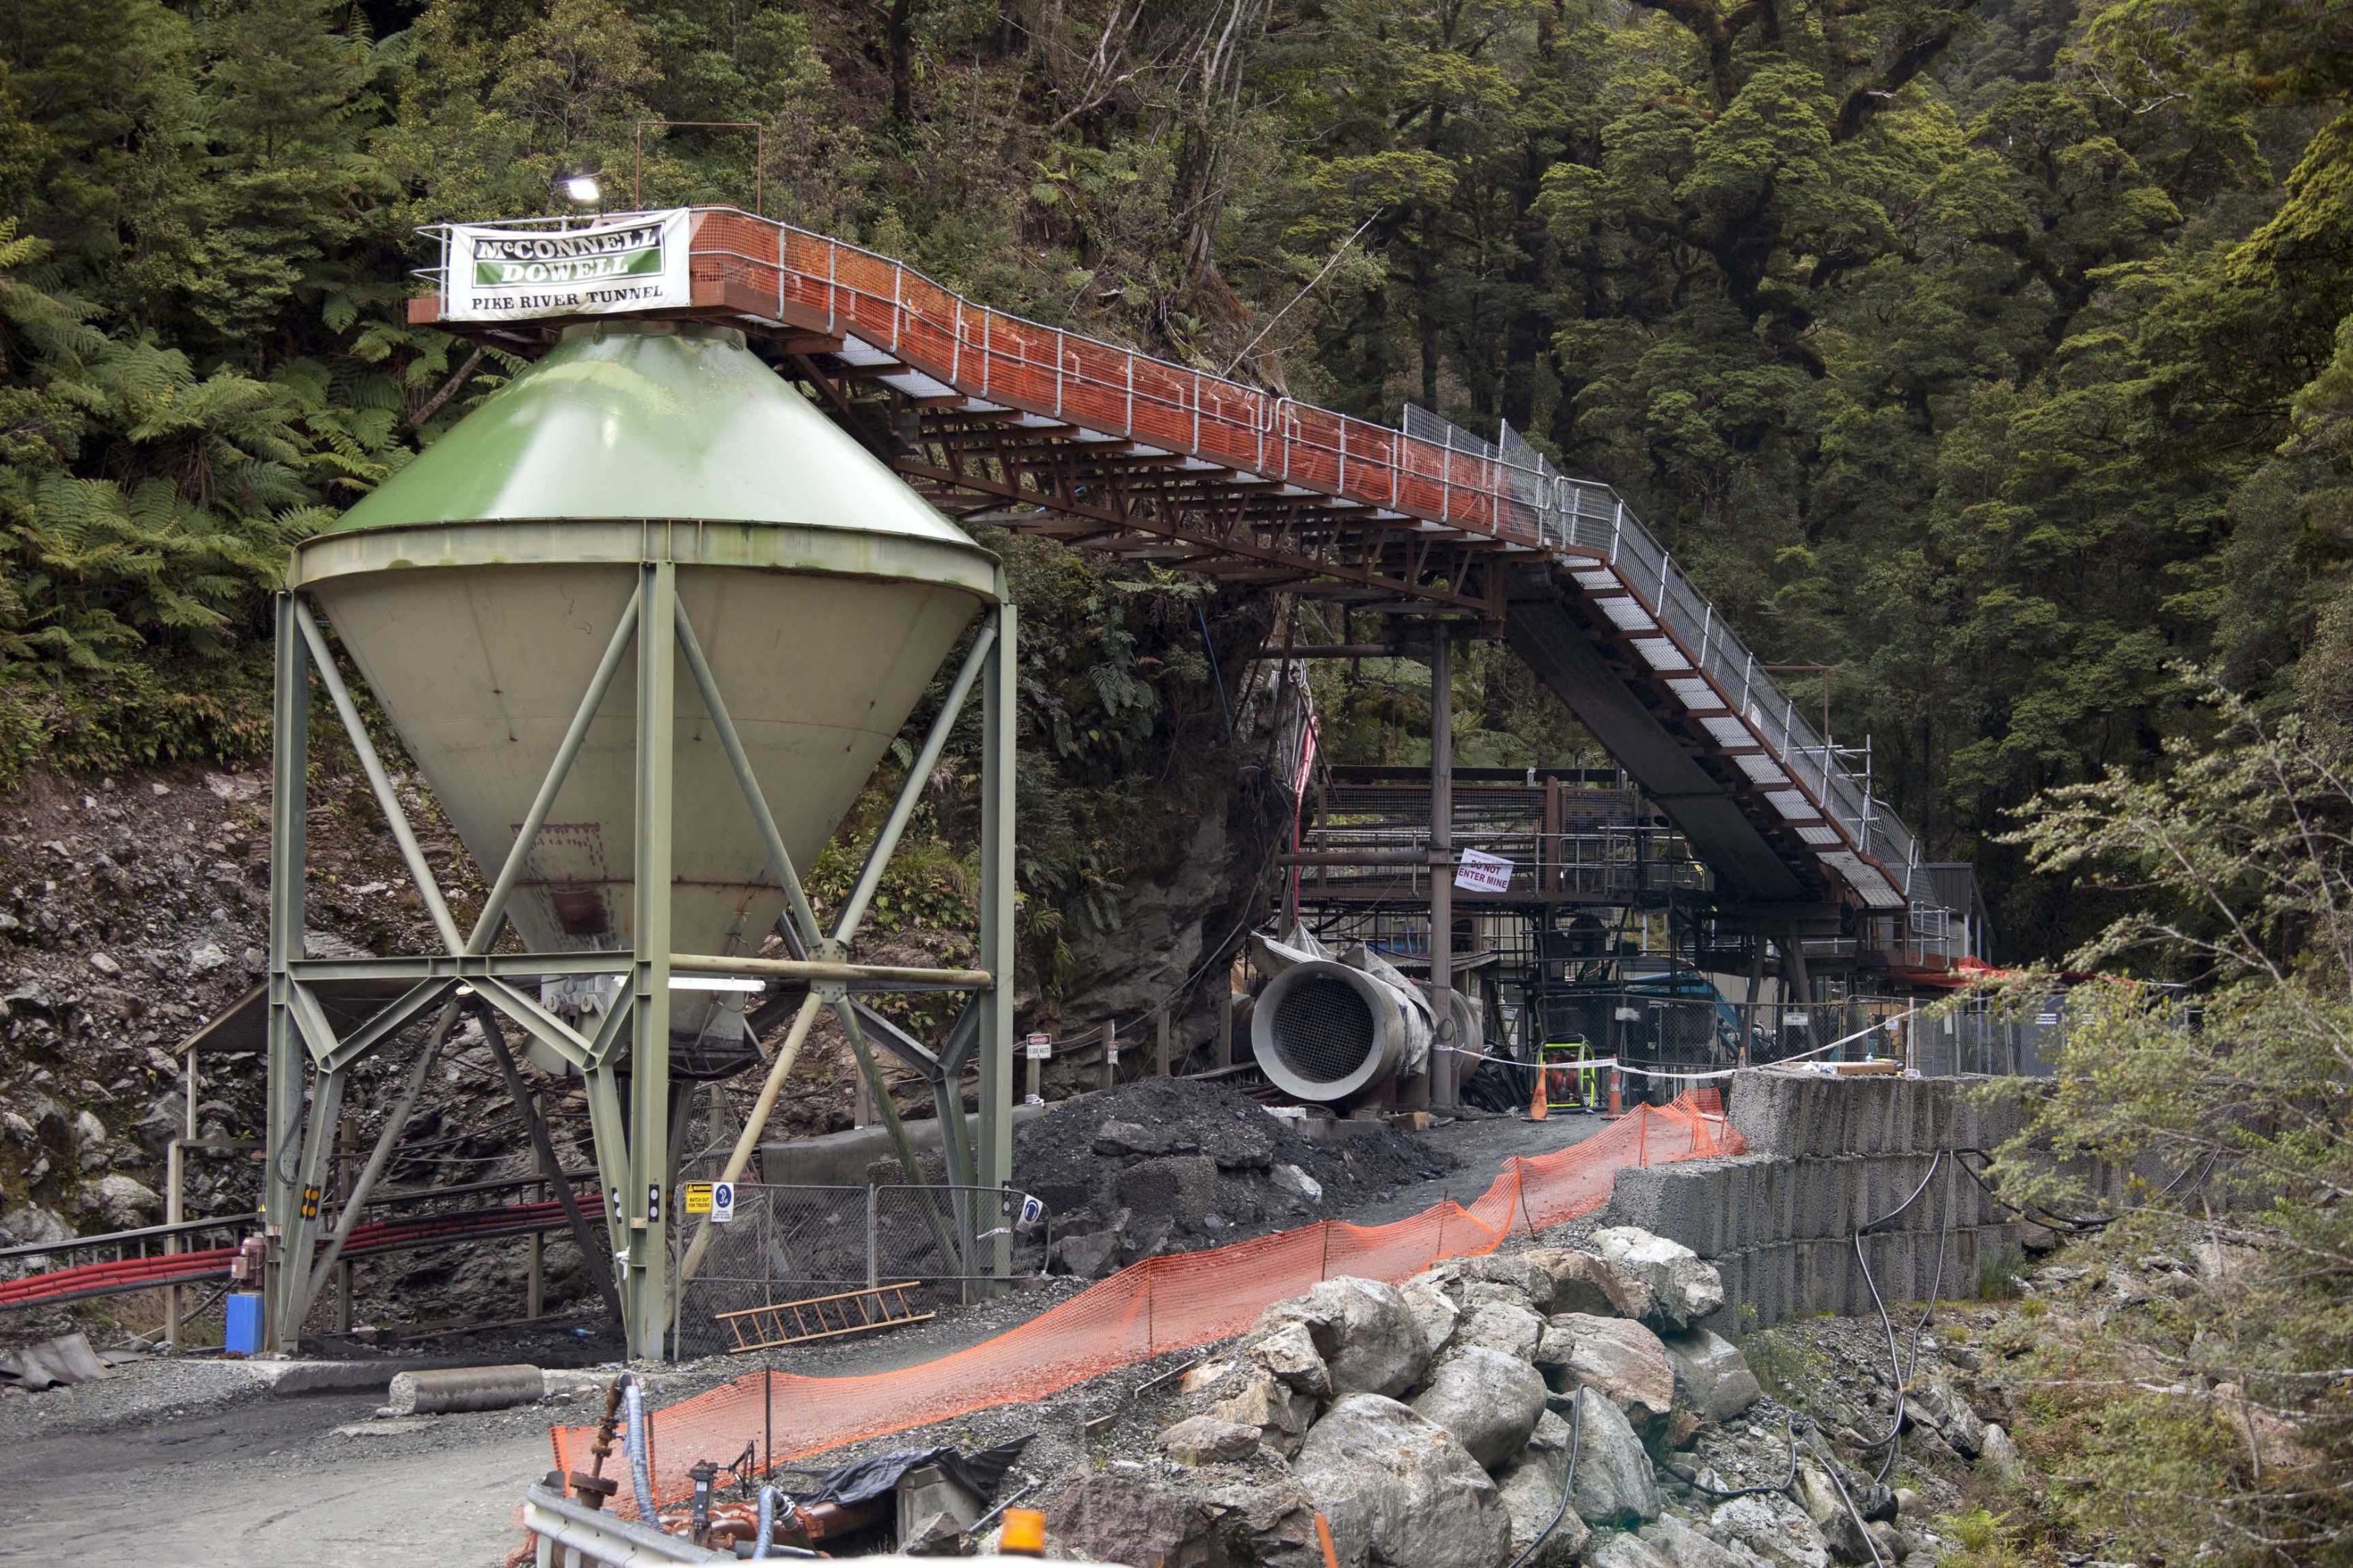 The entrance to the Pike River coal mine is seen in Greymouth, New Zealand, Nov. 21, 2010.